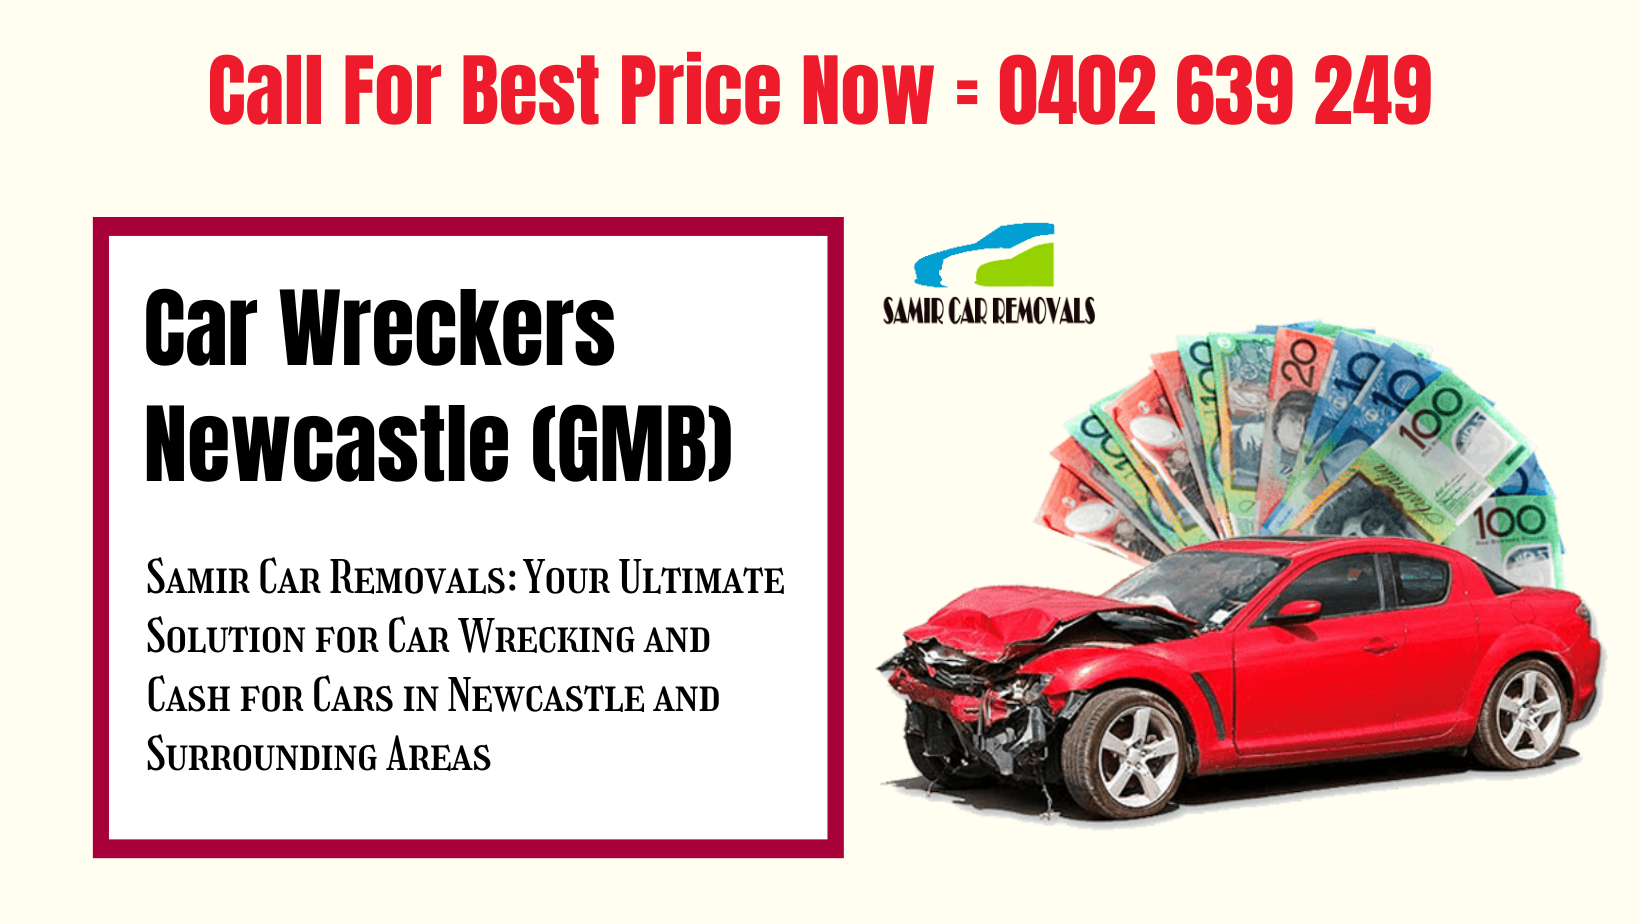 Samir Car Removals: Your Ultimate Solution For Car Wrecking And Cash For Cars in Newcastle And Surrounding Areas